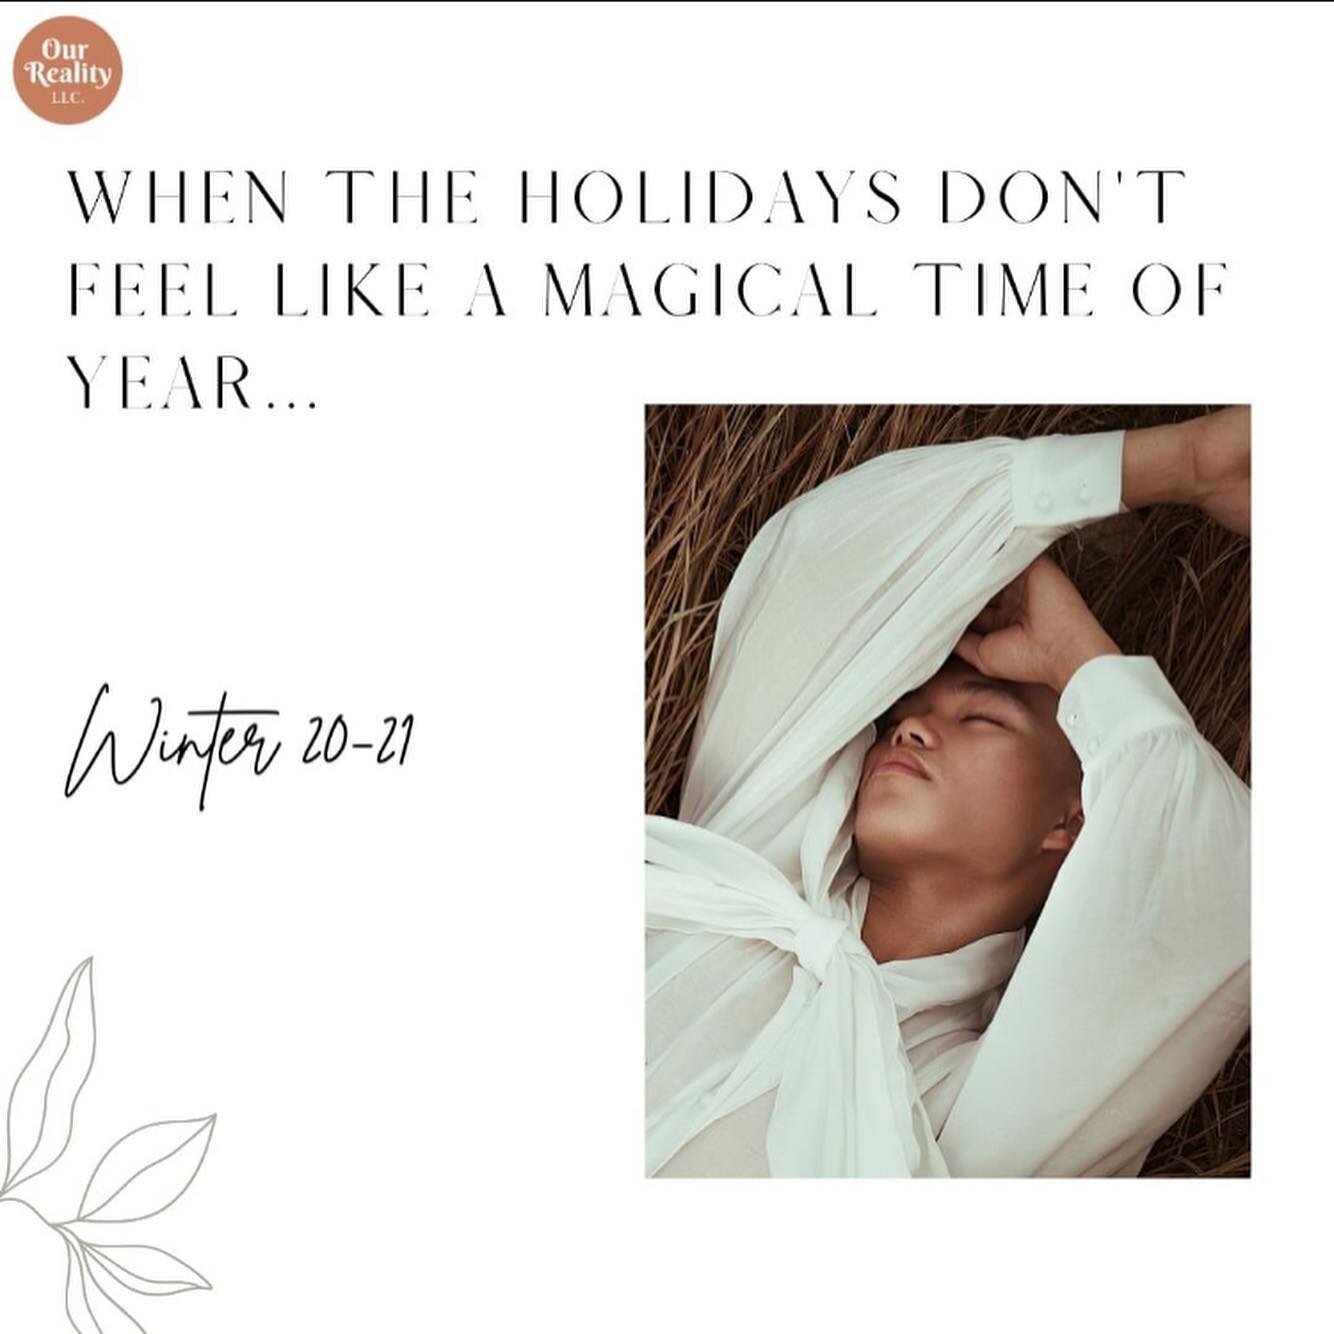 When the Holidays Don&rsquo;t Feel Like a Magical Time of Year&hellip;

Are you sitting at home scrolling through holiday-centric themed posts, stories, and reels? Do you feel disappointment, frustration, or even jealousy pop up?

These are COMPLETEL